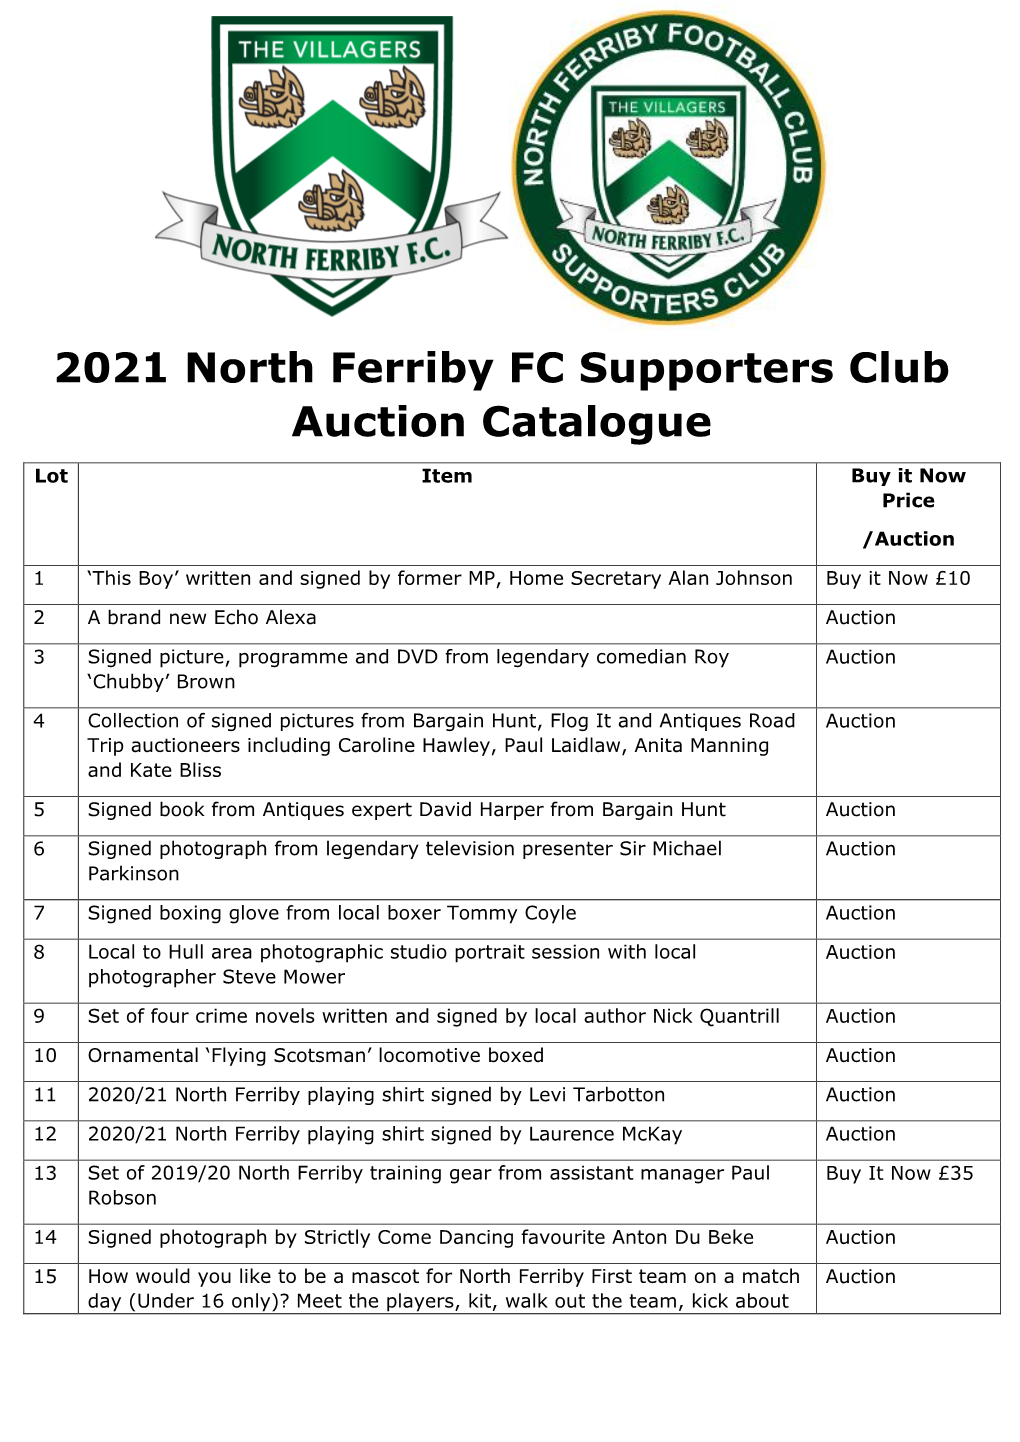 2021 North Ferriby FC Supporters Club Auction Catalogue